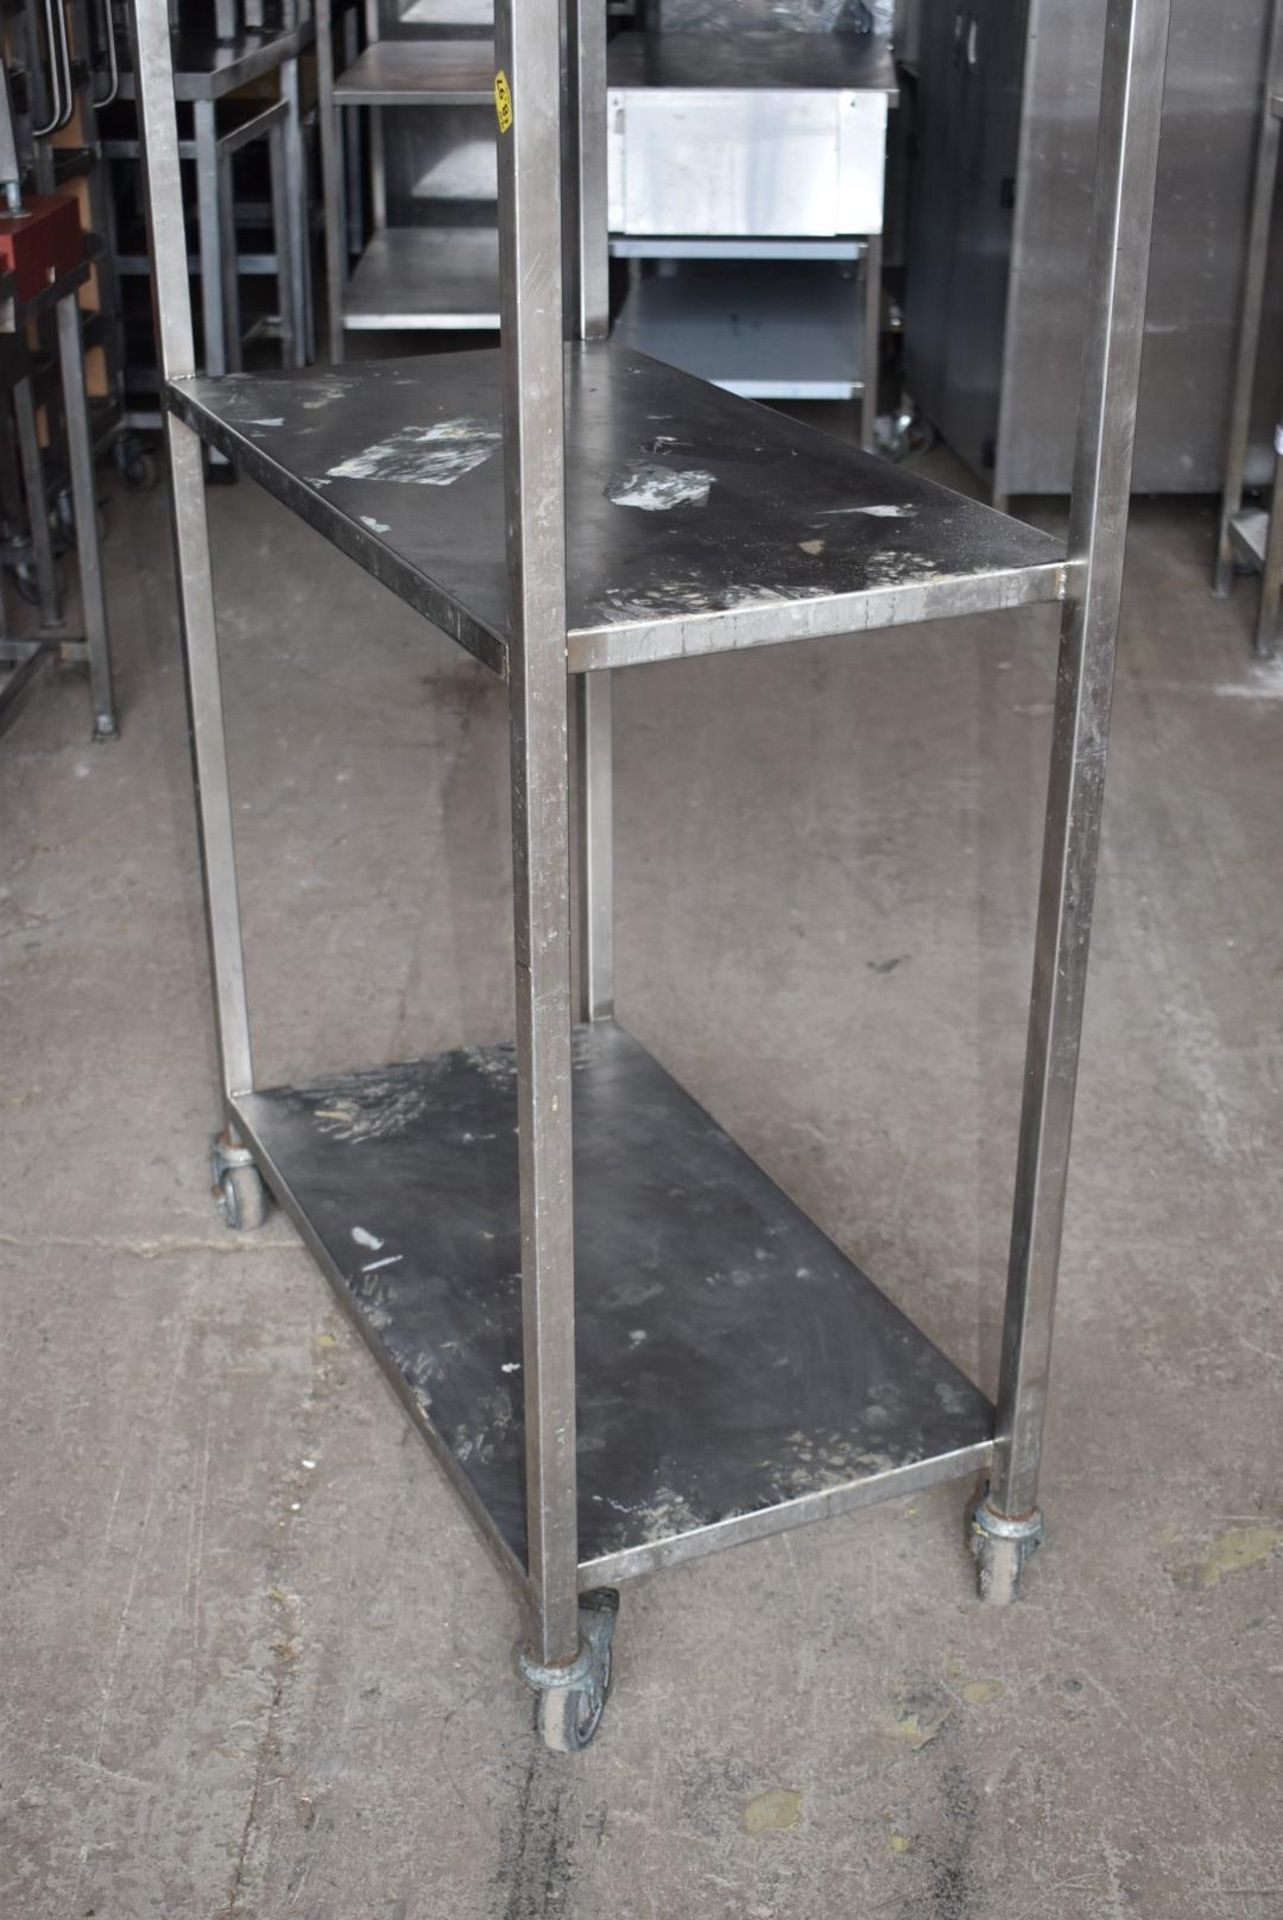 1 x Stainless Steel Two Tier Shelf Unit With Castor Wheels - Dimensions: H170 x W90 x D45 cms - - Image 3 of 10